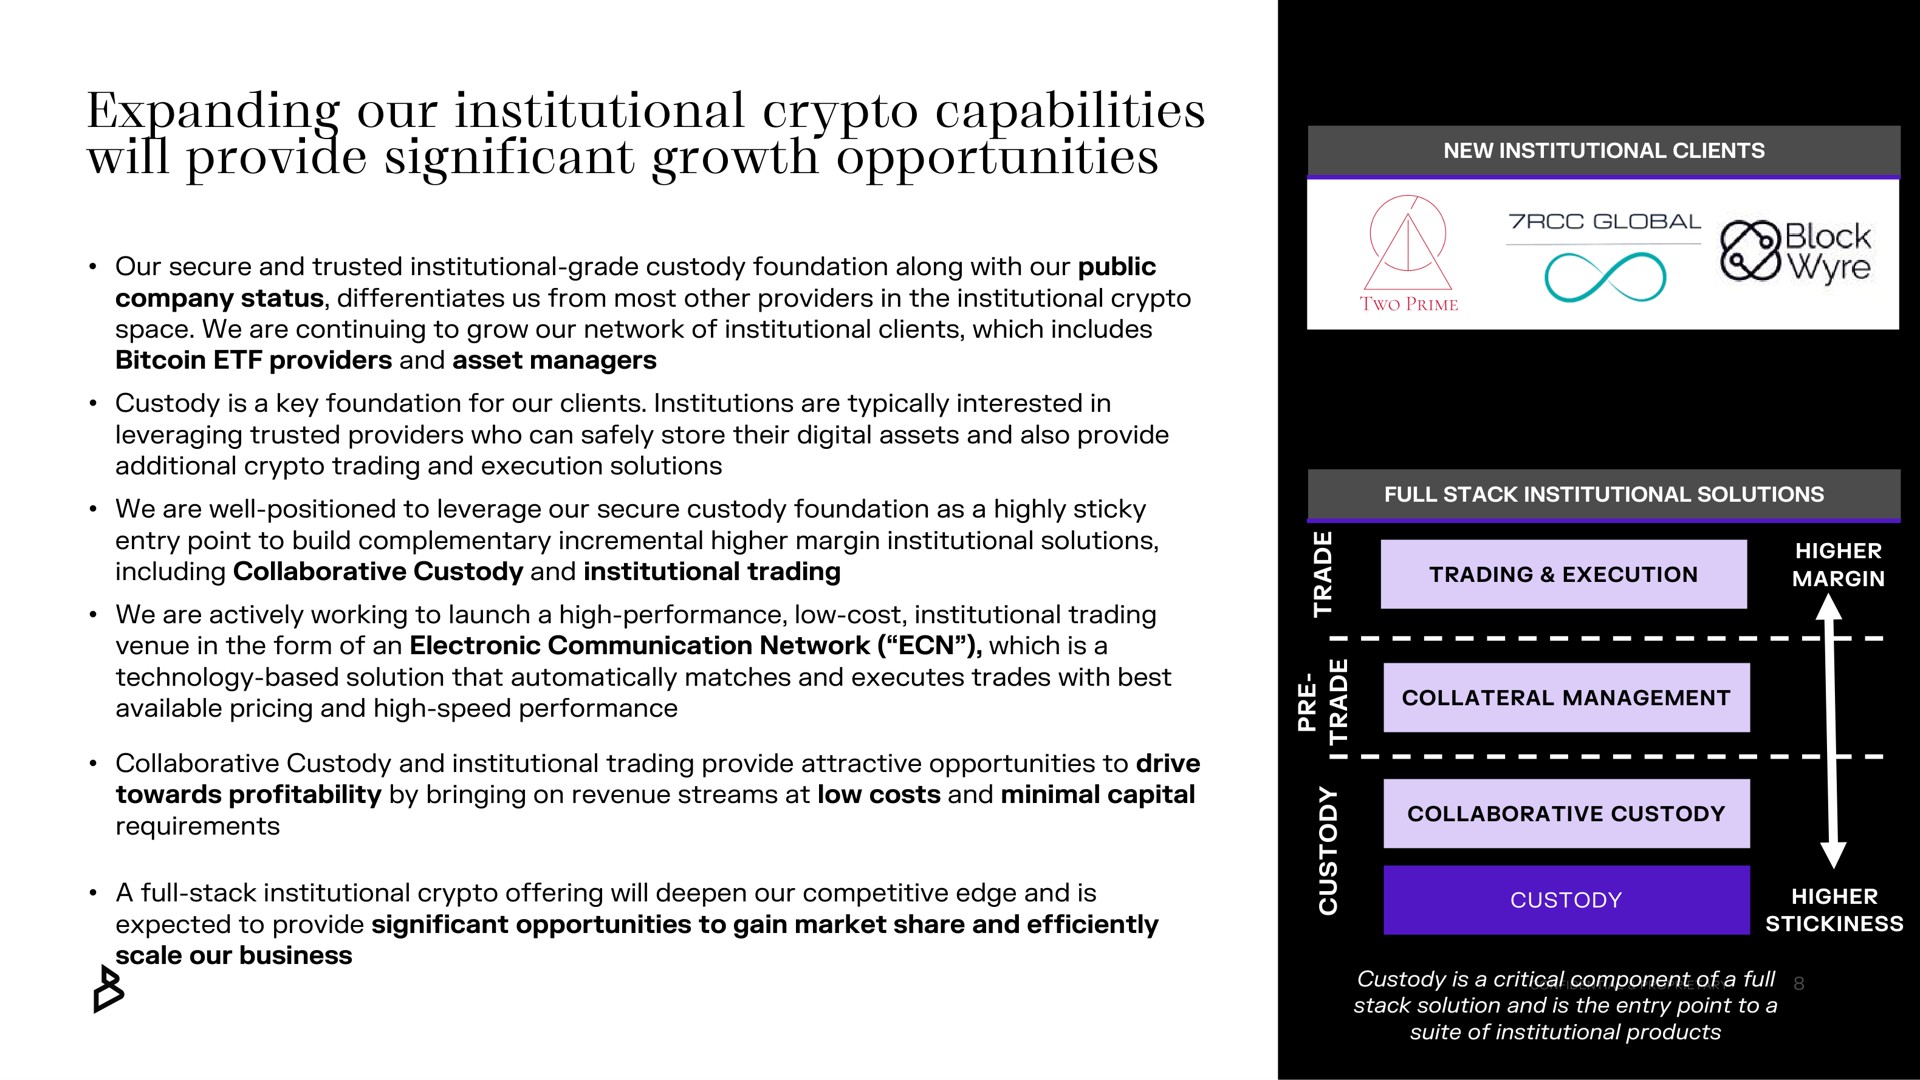 expanding our institutional capabilities will provide significant growth opportunities | Bakkt